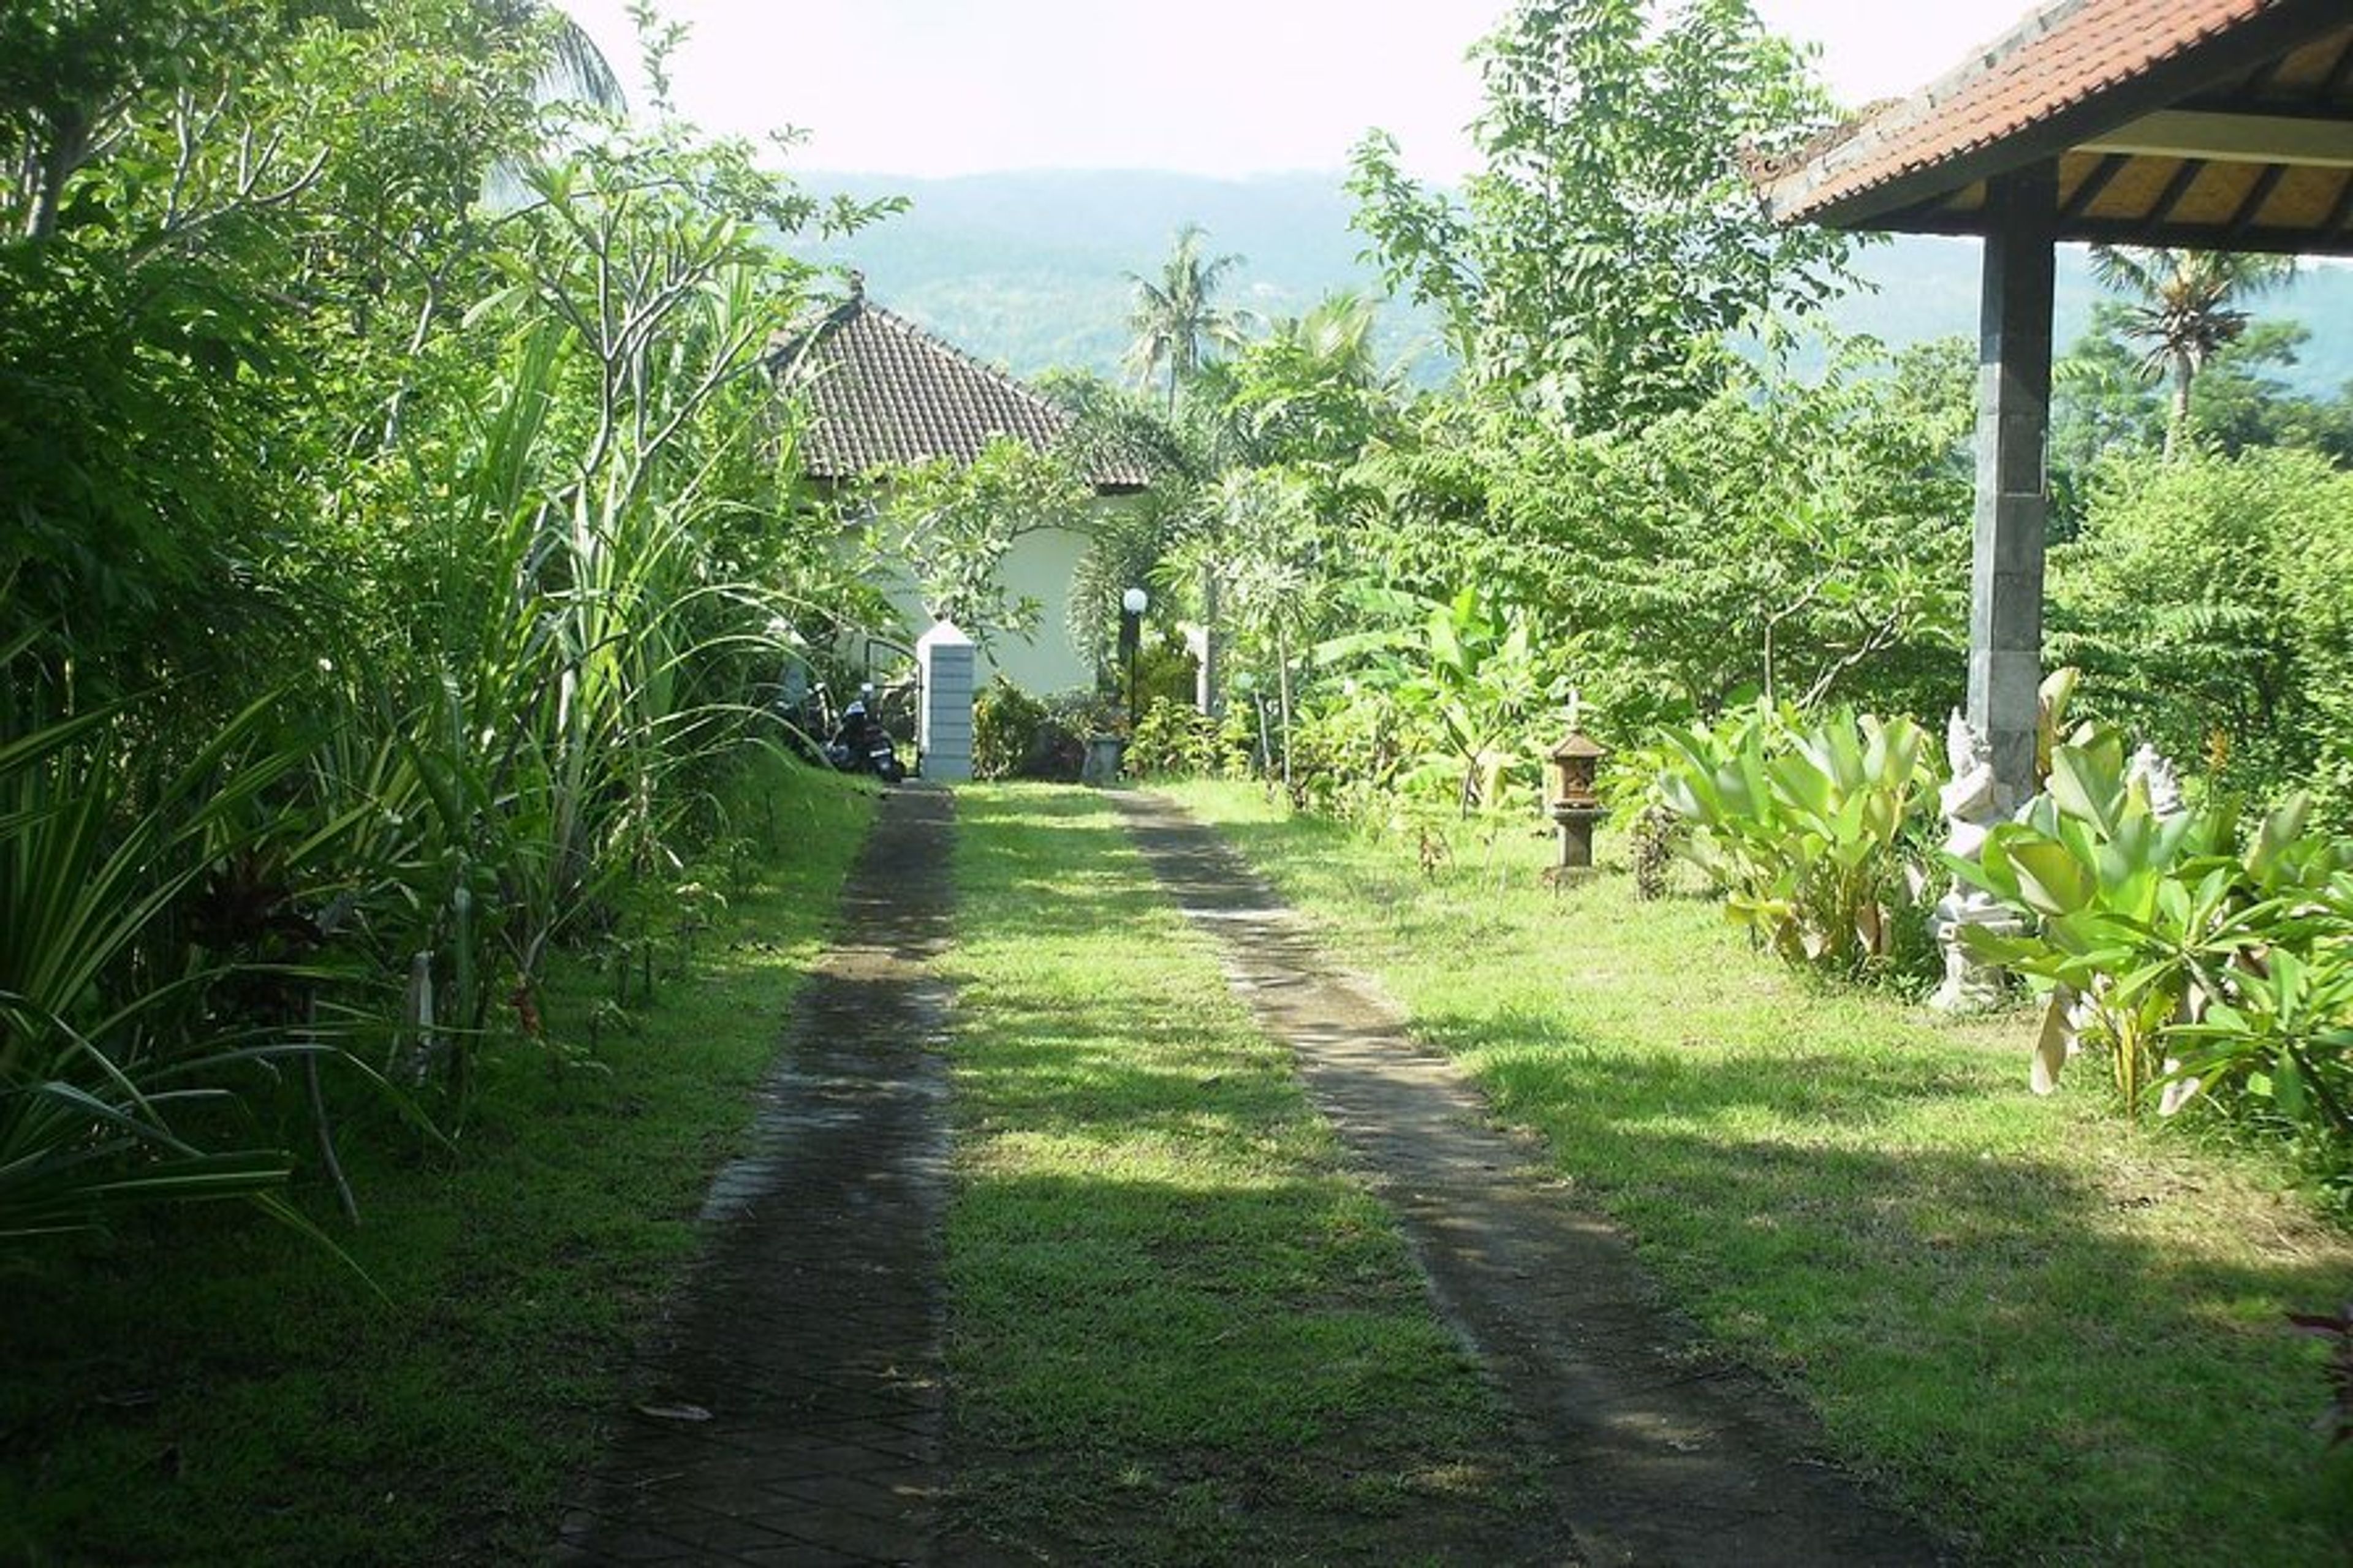 Driveway to the villa with at the righ the gazebo